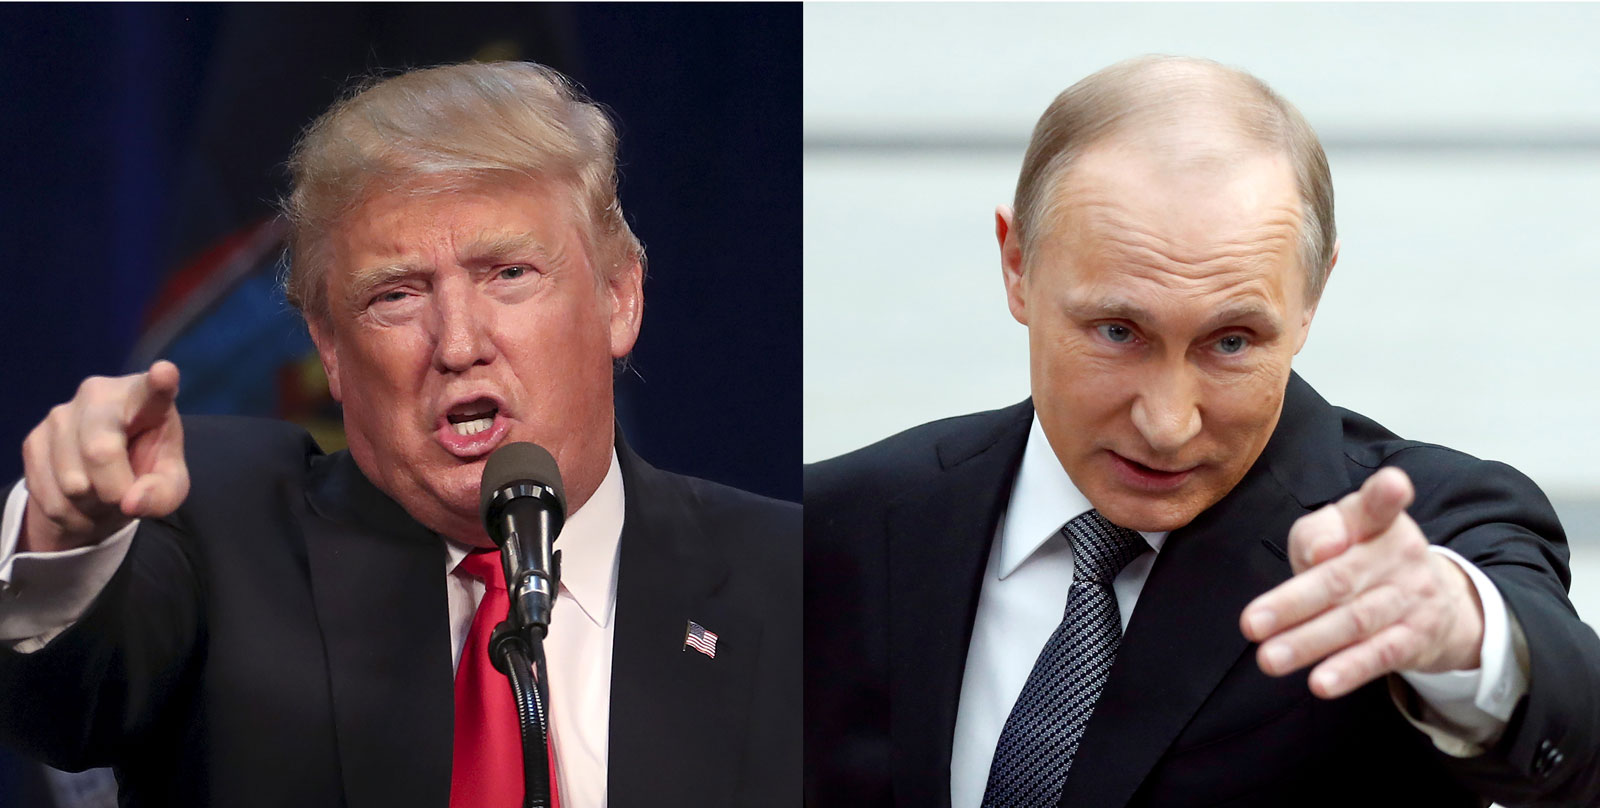 Donald Trump at a campaign rally, Syracuse, New York, April 16, 2016; Vladimir Putin at a meeting with journalists, Moscow, Russia, April 14, 2016